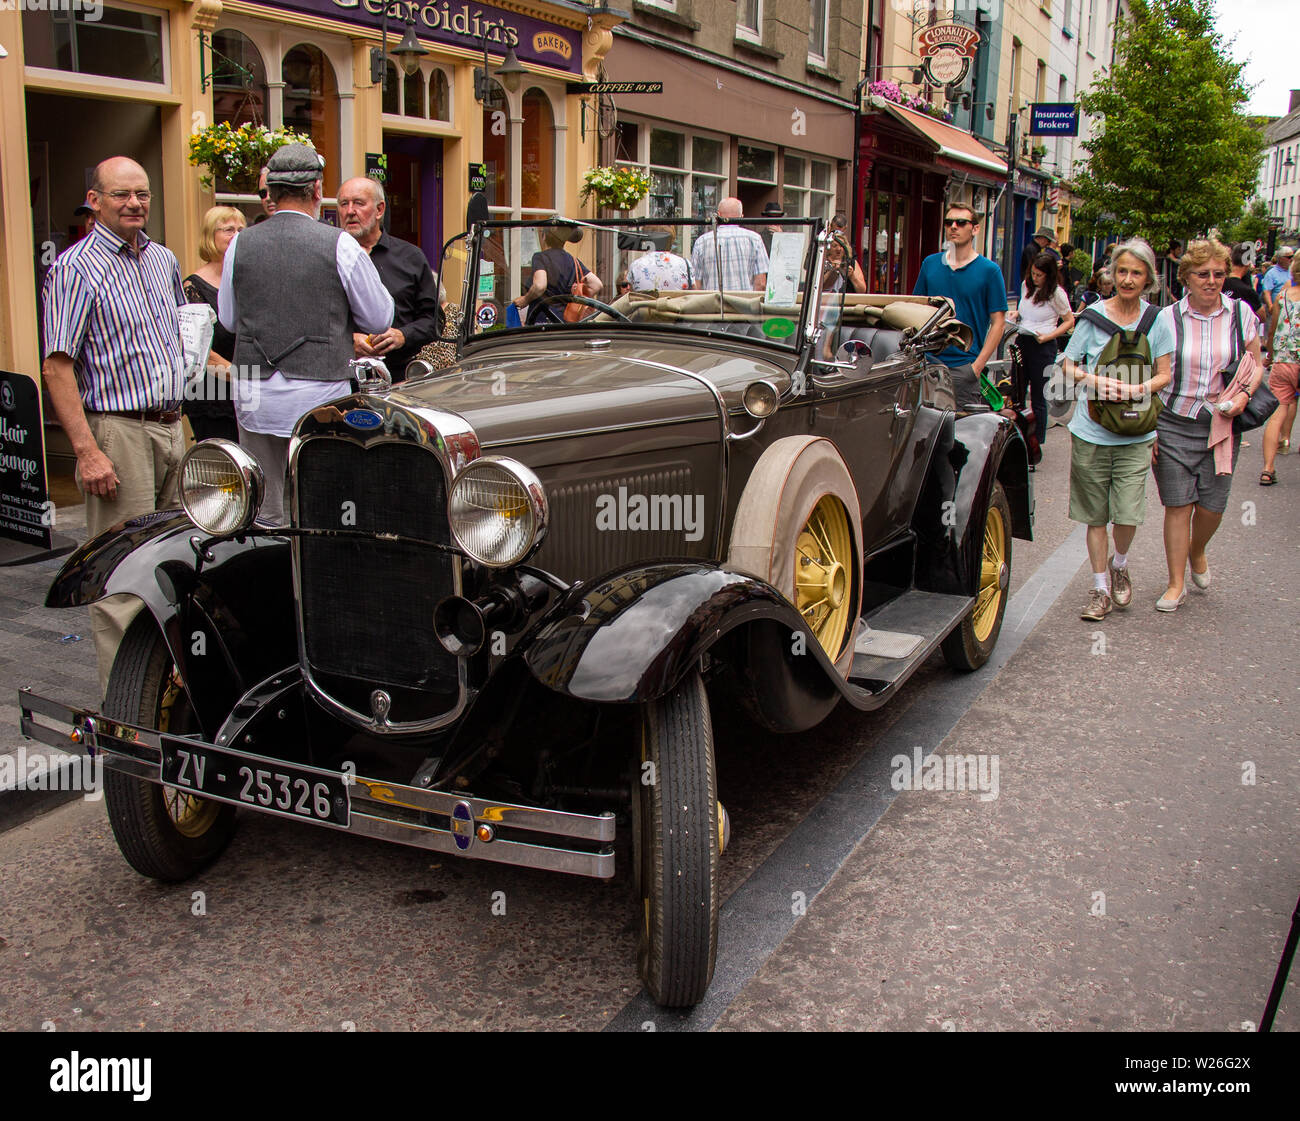 Vintage ford soft top motor car parked on a high street Stock Photo